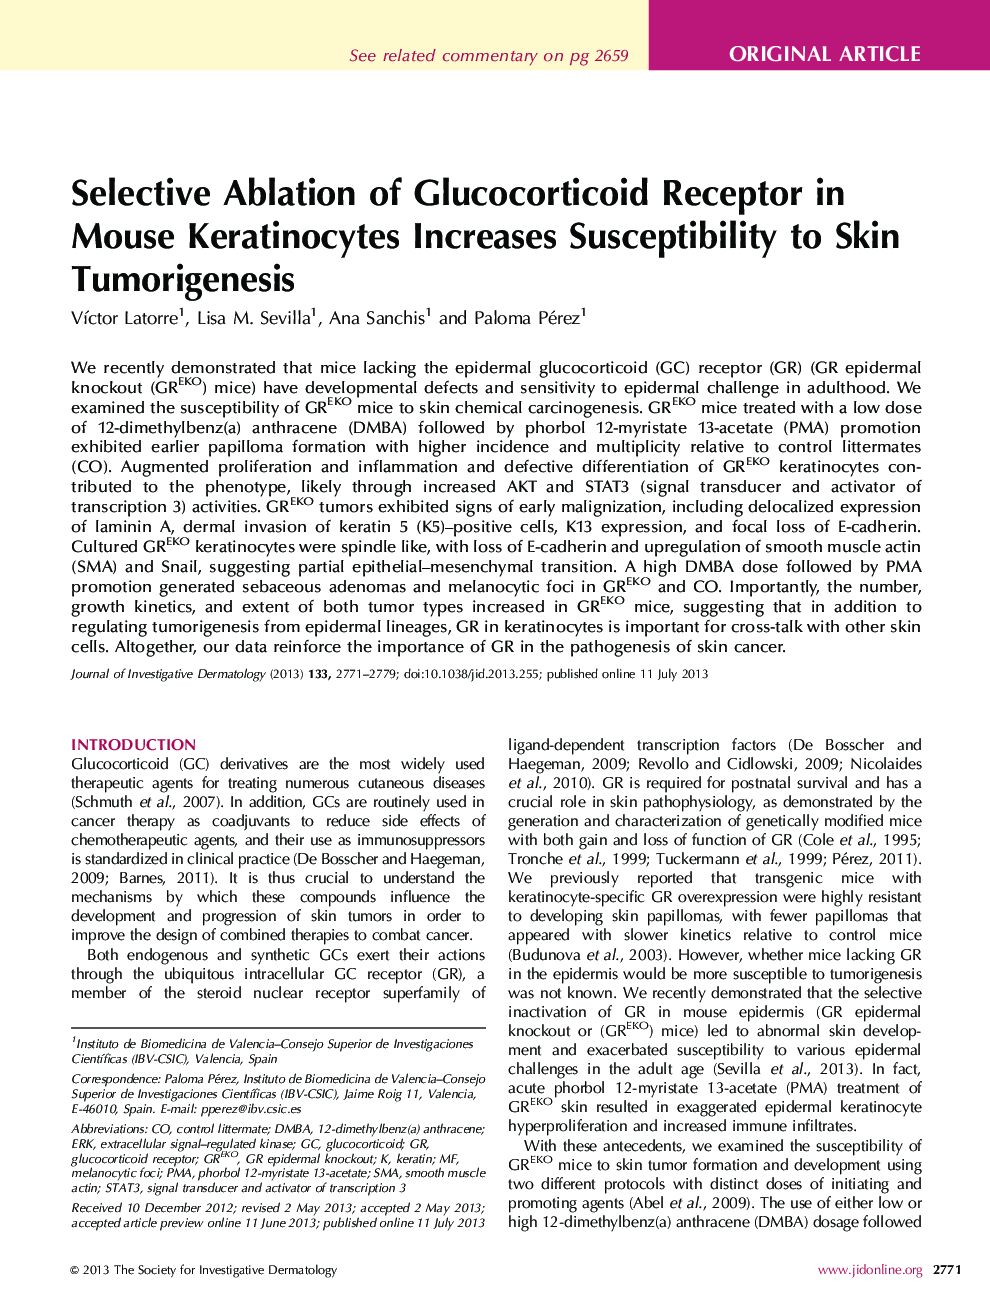 Original ArticleSelective Ablation of Glucocorticoid Receptor in Mouse Keratinocytes Increases Susceptibility to Skin Tumorigenesis